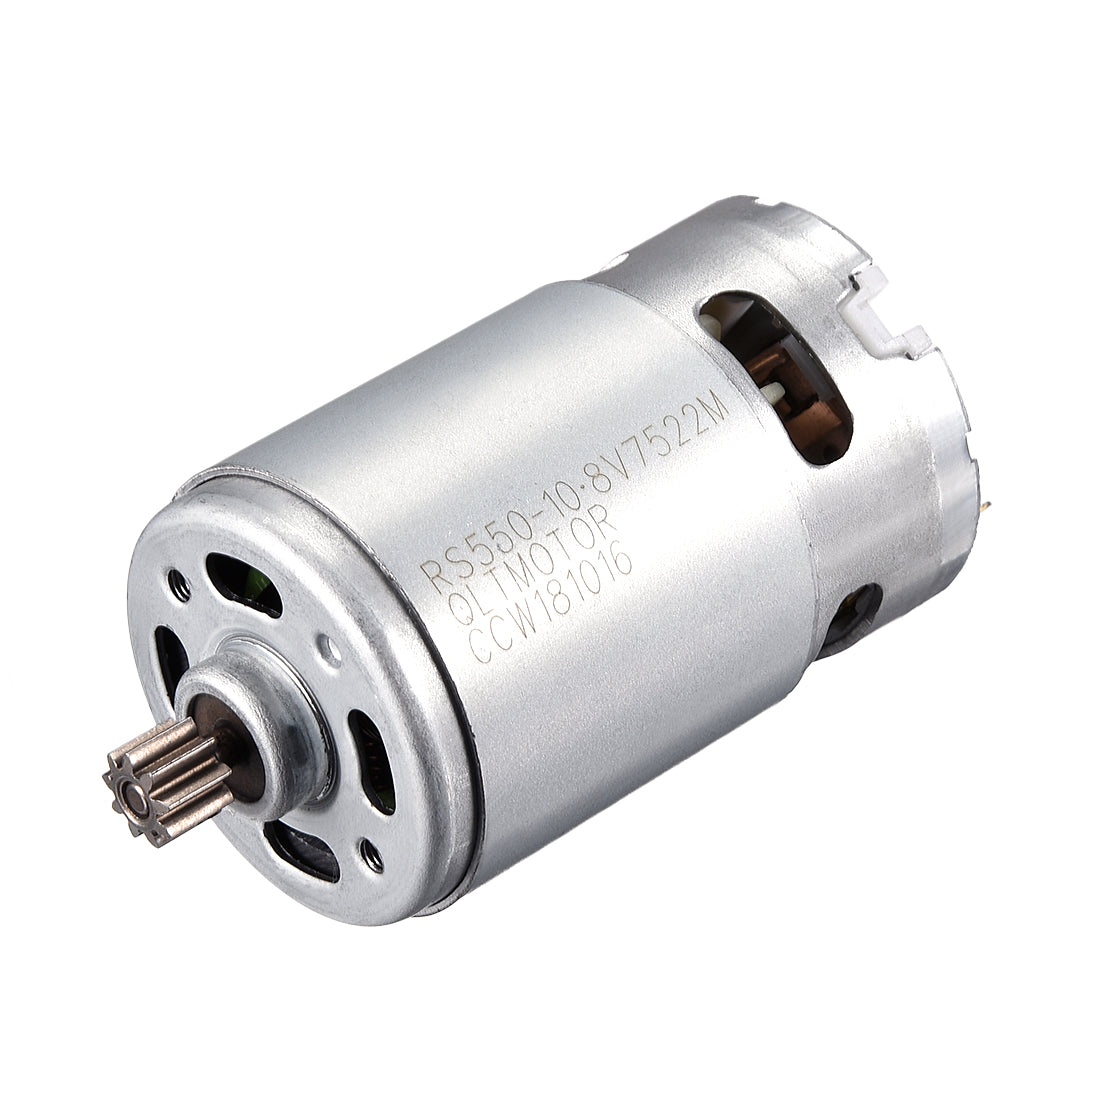 uxcell Uxcell DC 10.8V 19500RPM Electric Gear Motor 9 Teeth for Various Cordless Screwdriver